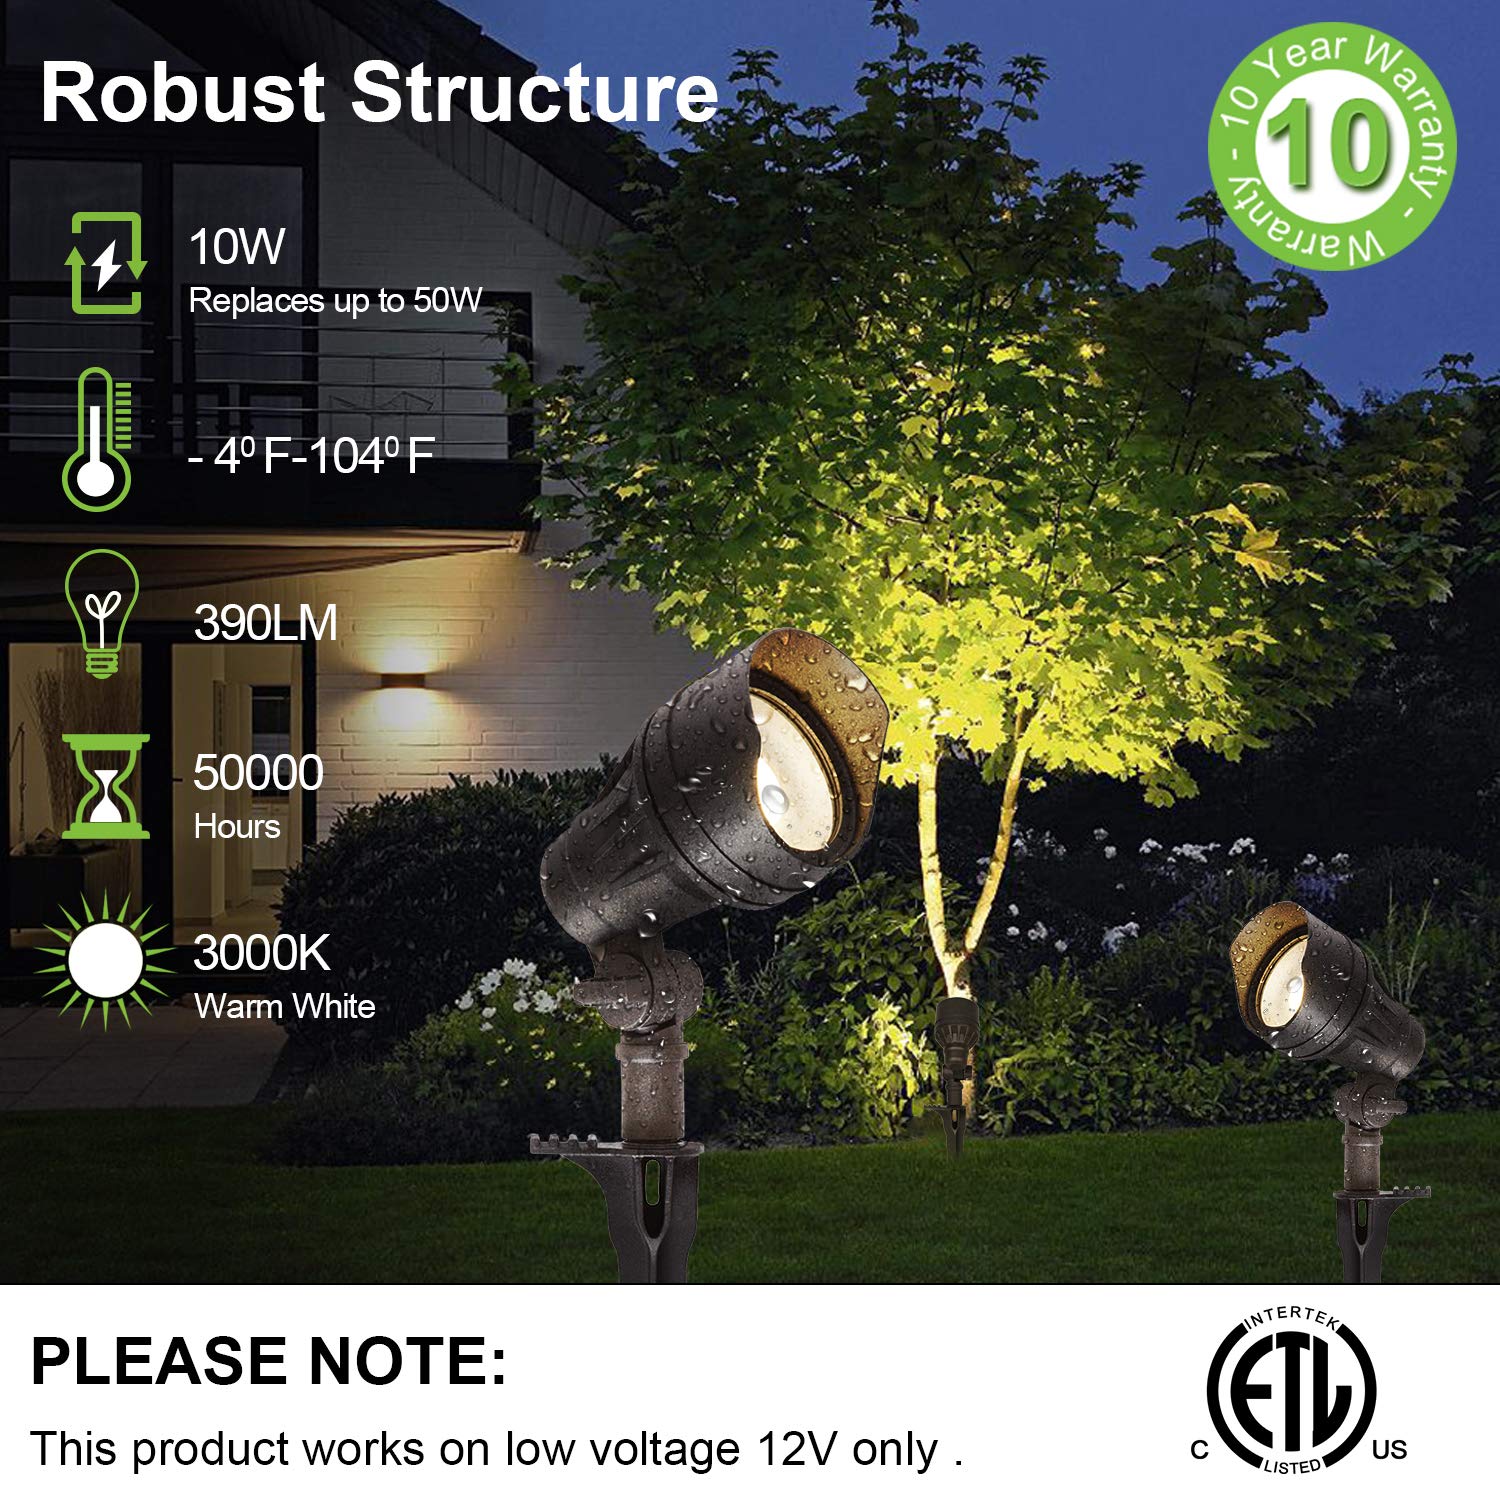 Low Voltage LED Landscape Spot Light Kits, 10W 390LM, 4 Pack, Driver & Cable Not Included